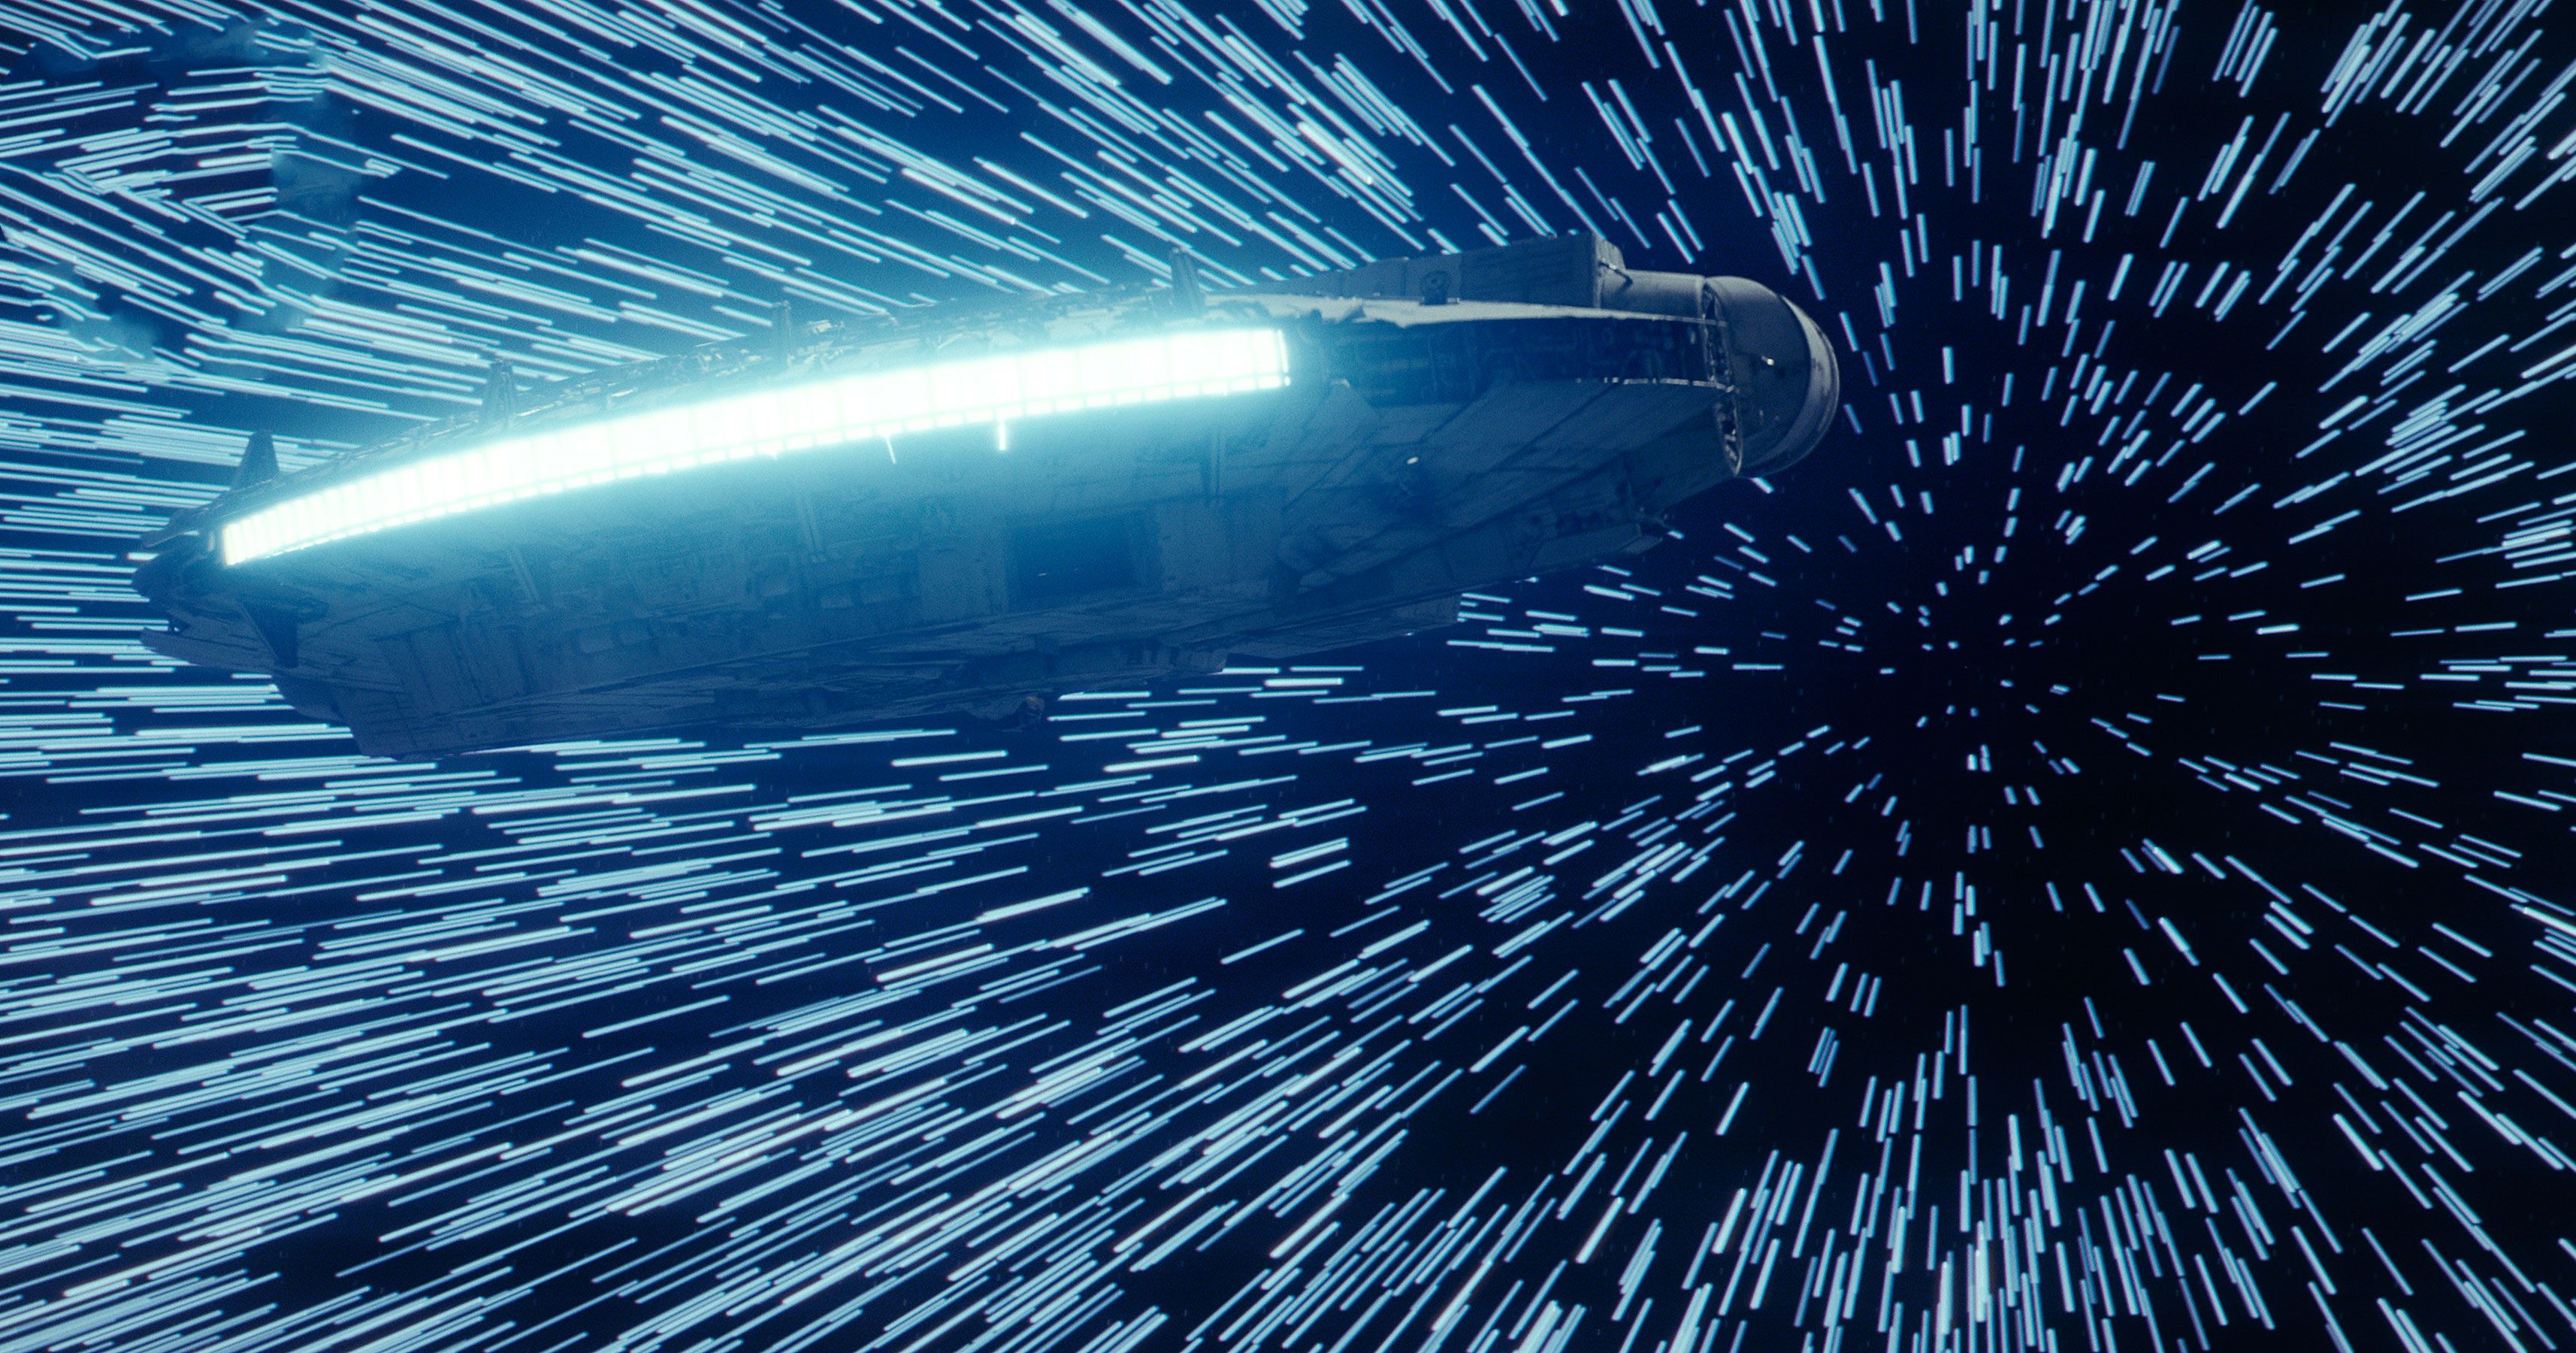 Hyperspace 3D Screensaver  Live Wallpaper  YouTube